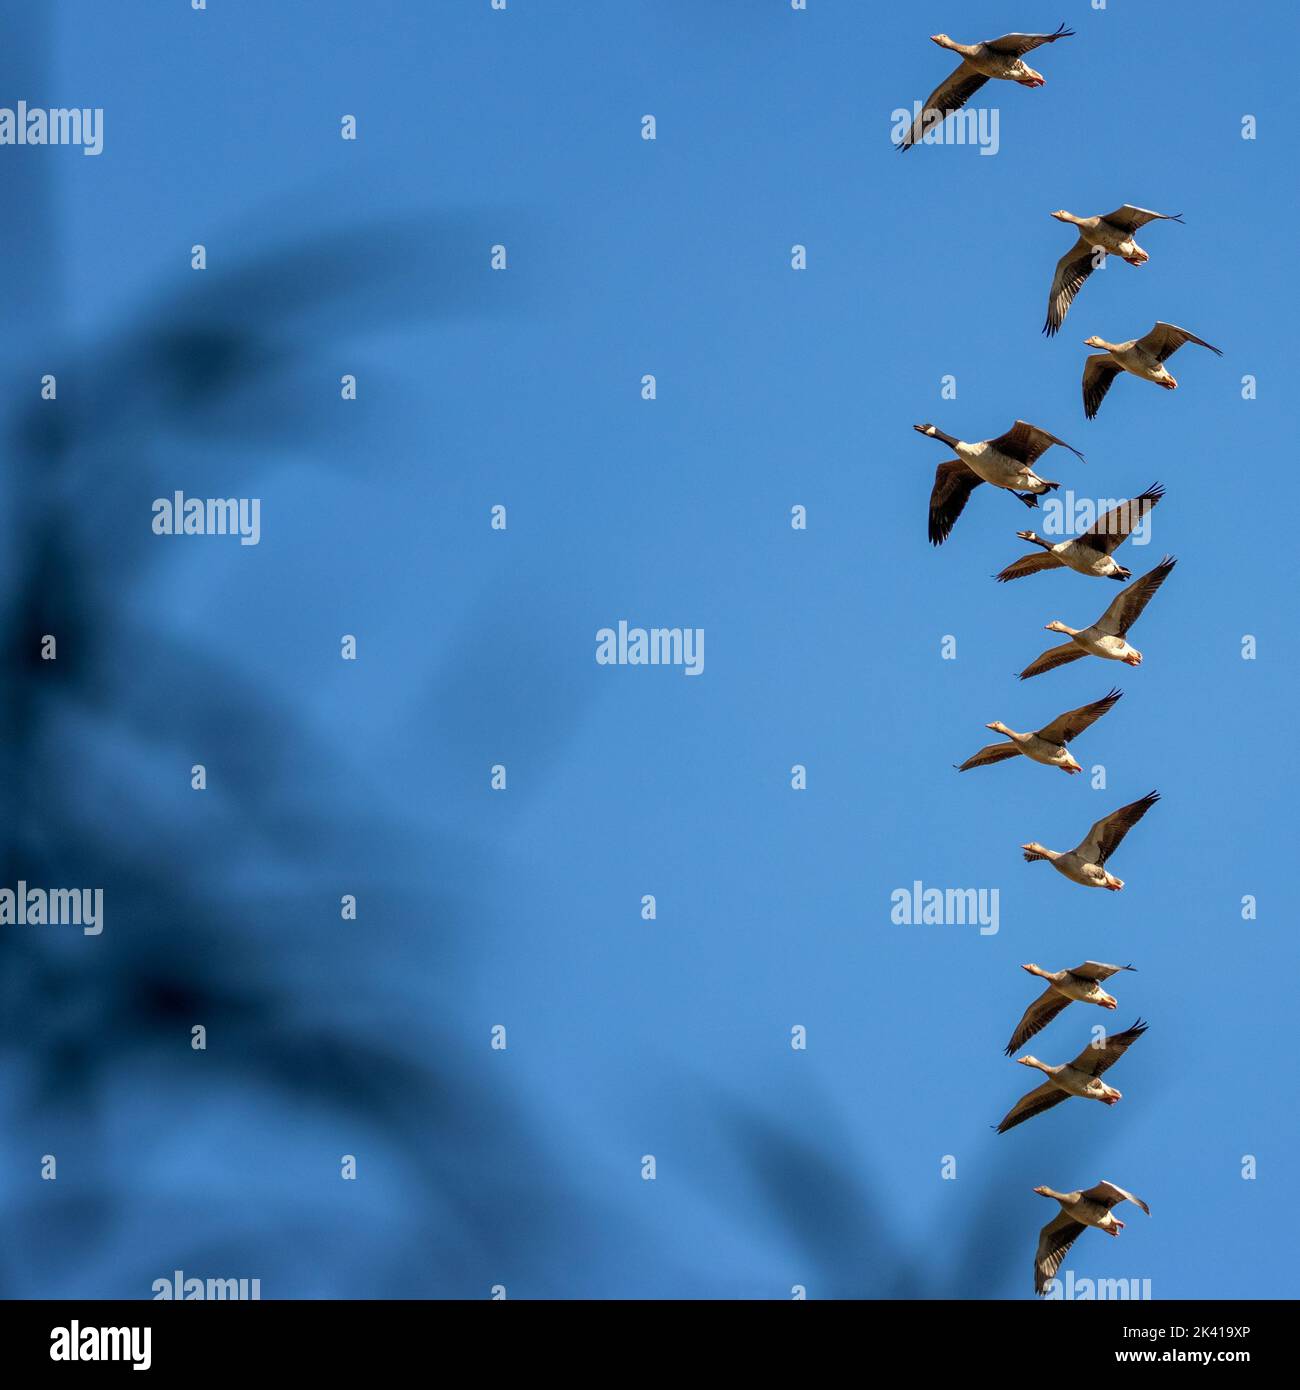 Mixed flock of Canada geese (Branta canadensis) and greylag geese (Anser anser) flying formation against a blue sky, UK Stock Photo